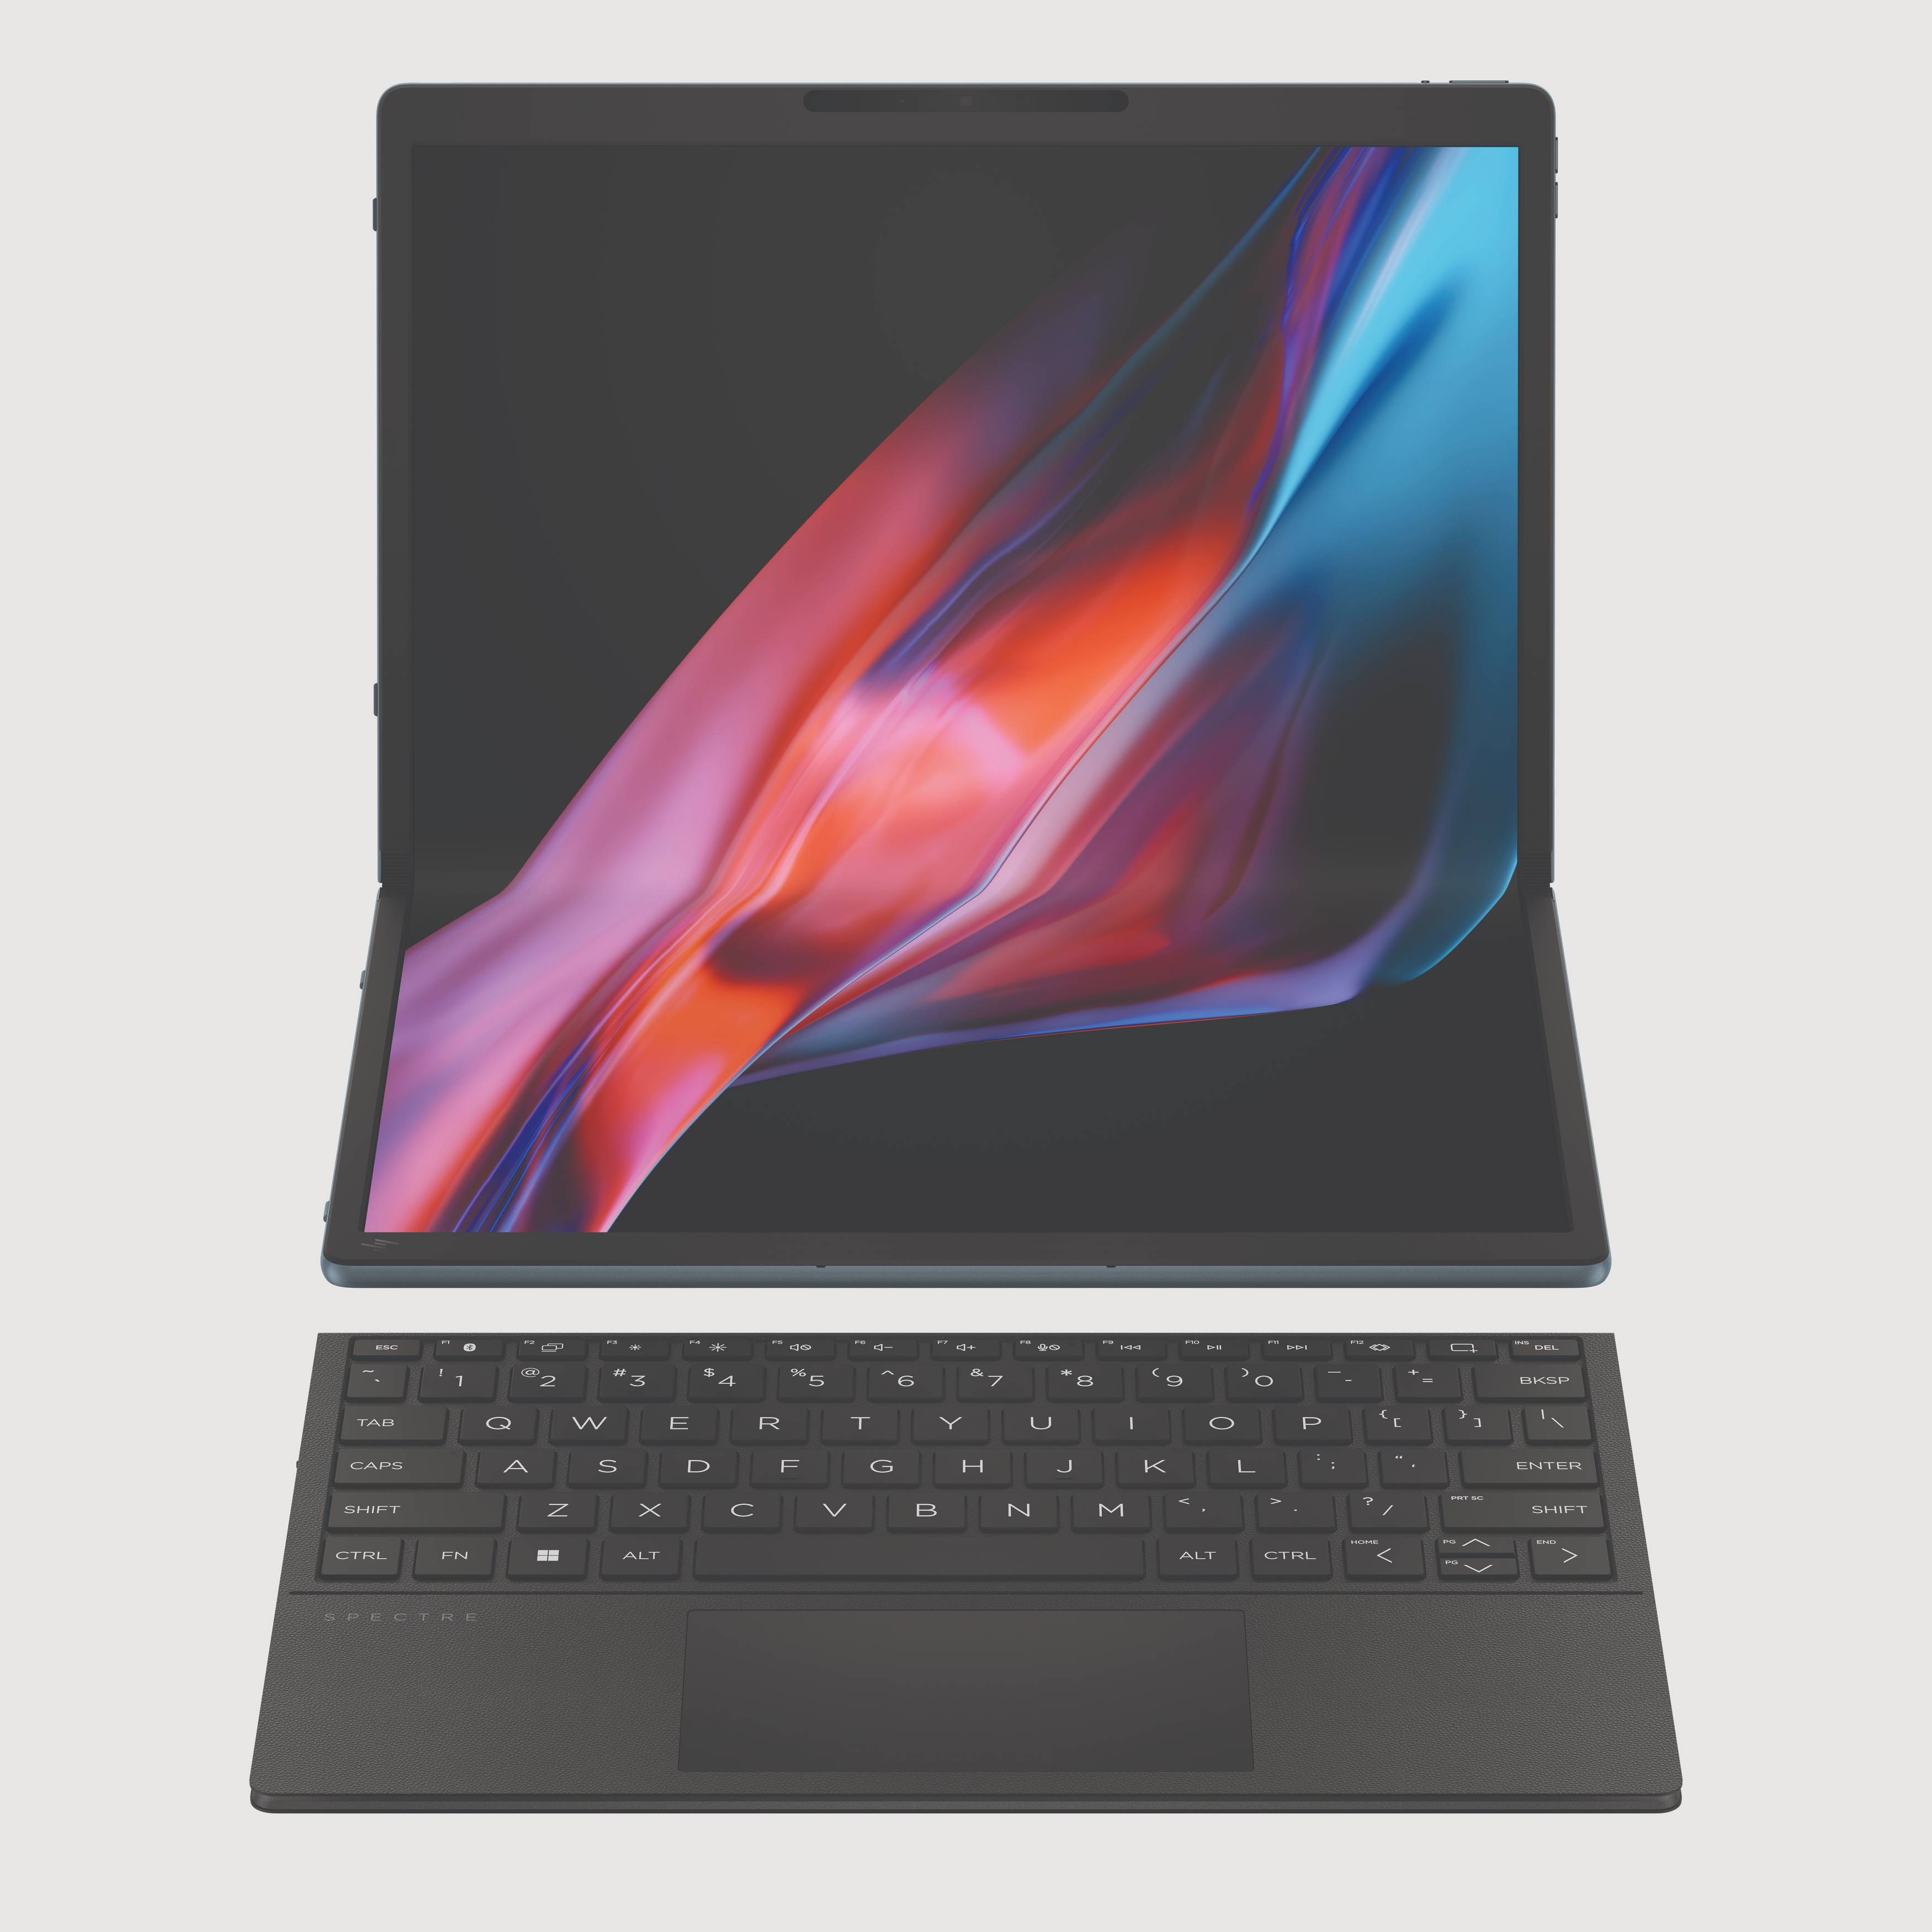 Image of the HP Spectre Foldable PC.